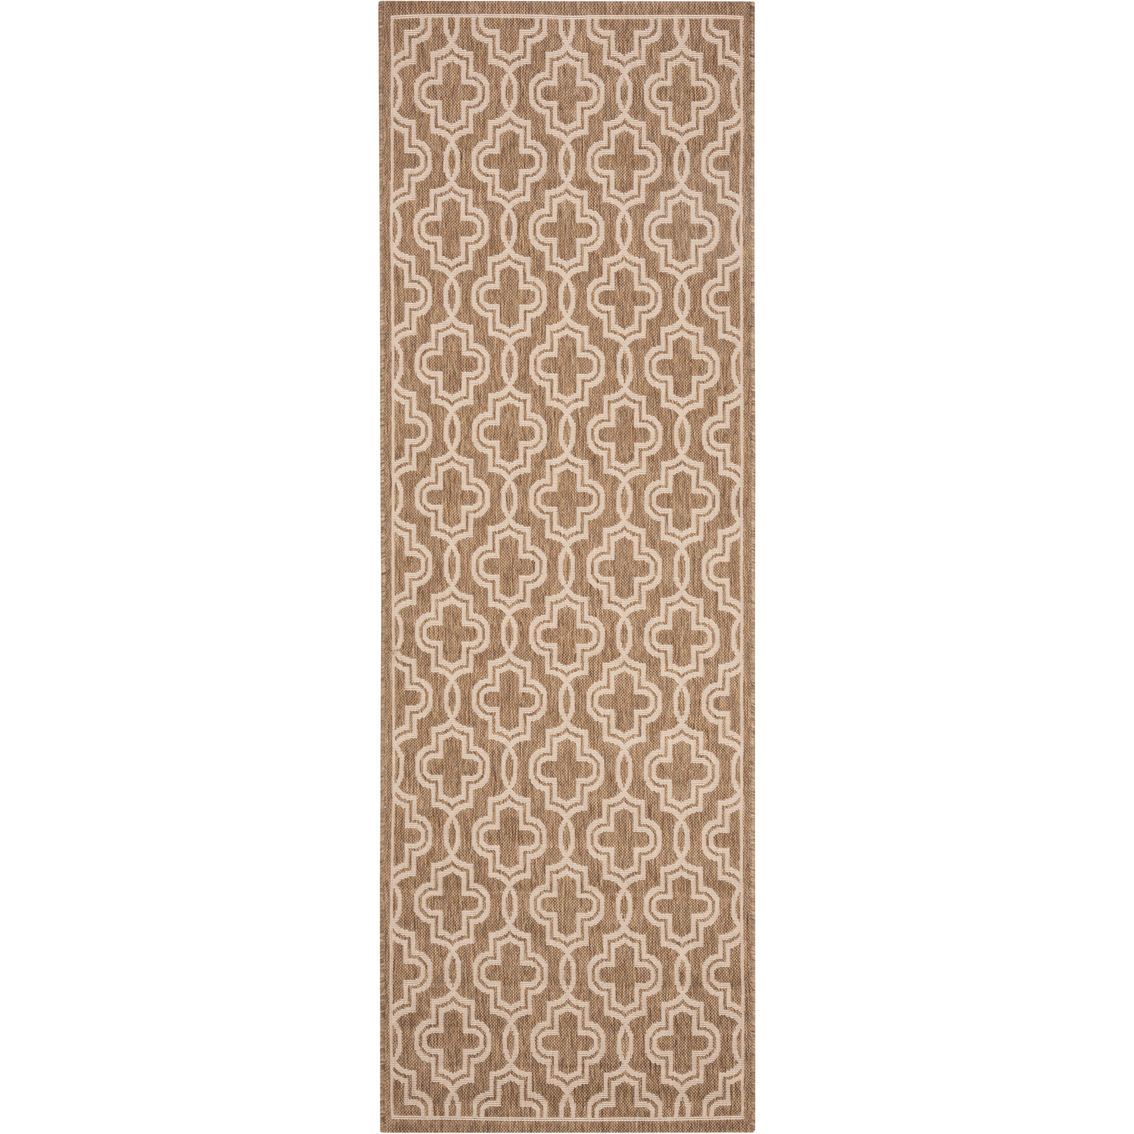 Martha Stewart Collection 4724 Area Rug - Image 2 of 3